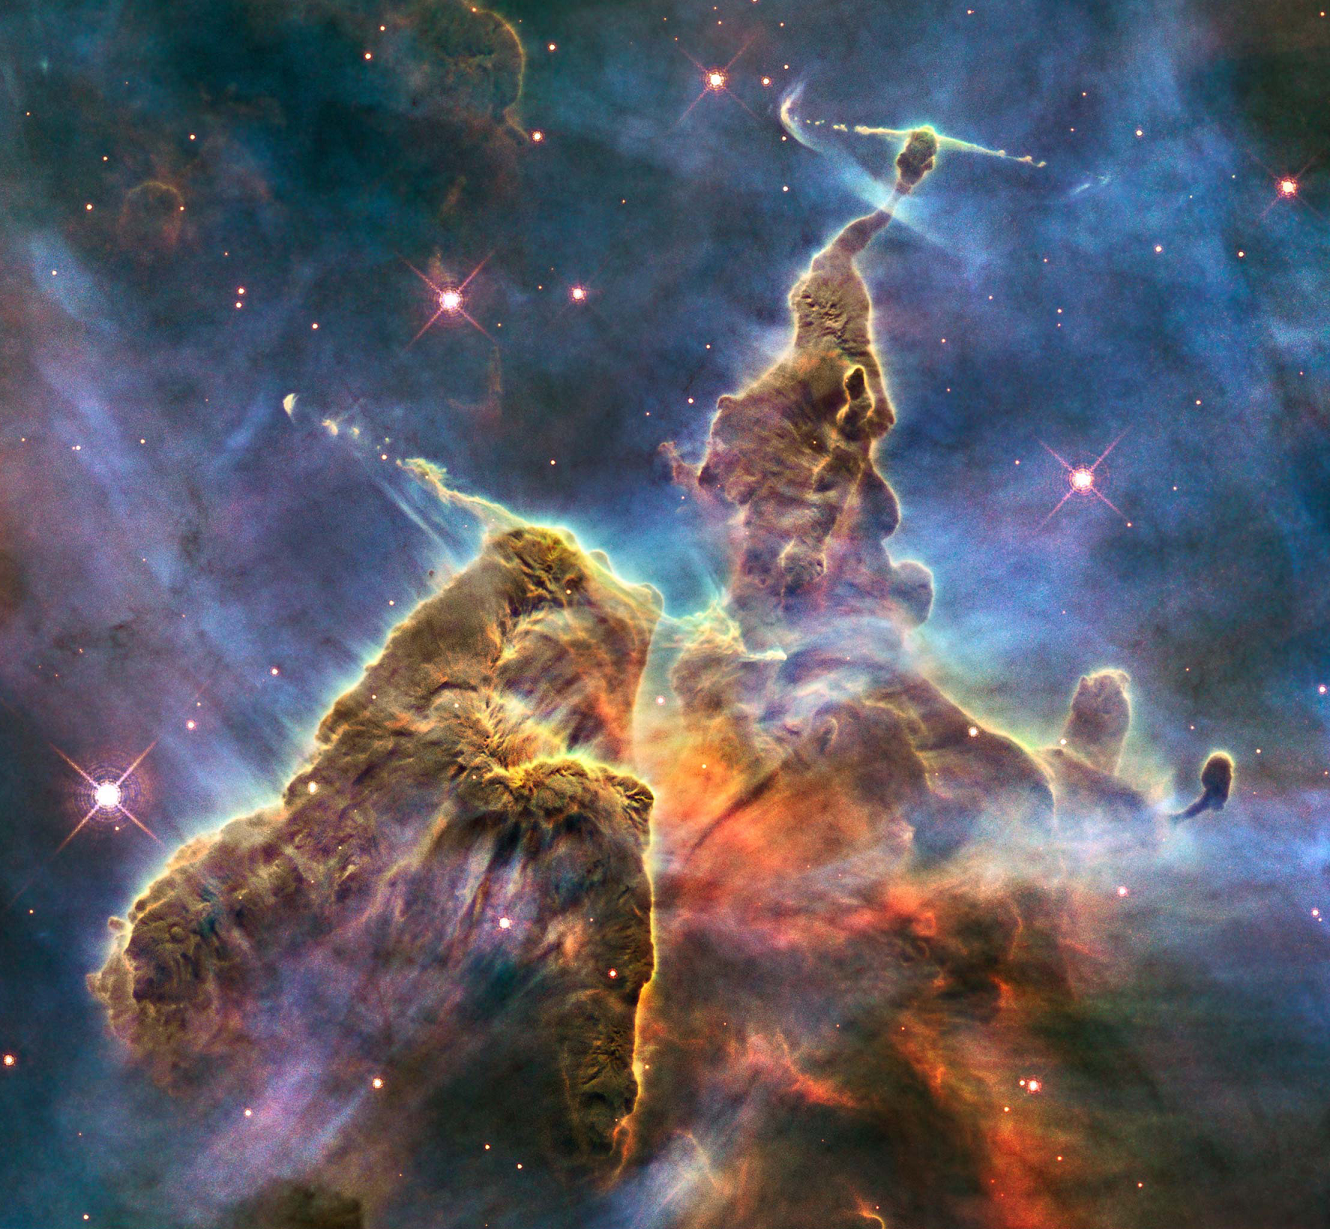 A region of the Carina nebula in the constellation of the same name imaged by the Hubble Space Telescope.  Unceremoniously dubbed Herbig-Haro 901 and 902, the pillars here are a few light years across, each light year being nearly six trillion miles, and contain massive high velocity jets of ionized gas and harsh radiation involved in formation of new stars.  Hubble imagery offers a beautiful visual reference that all can relate to.